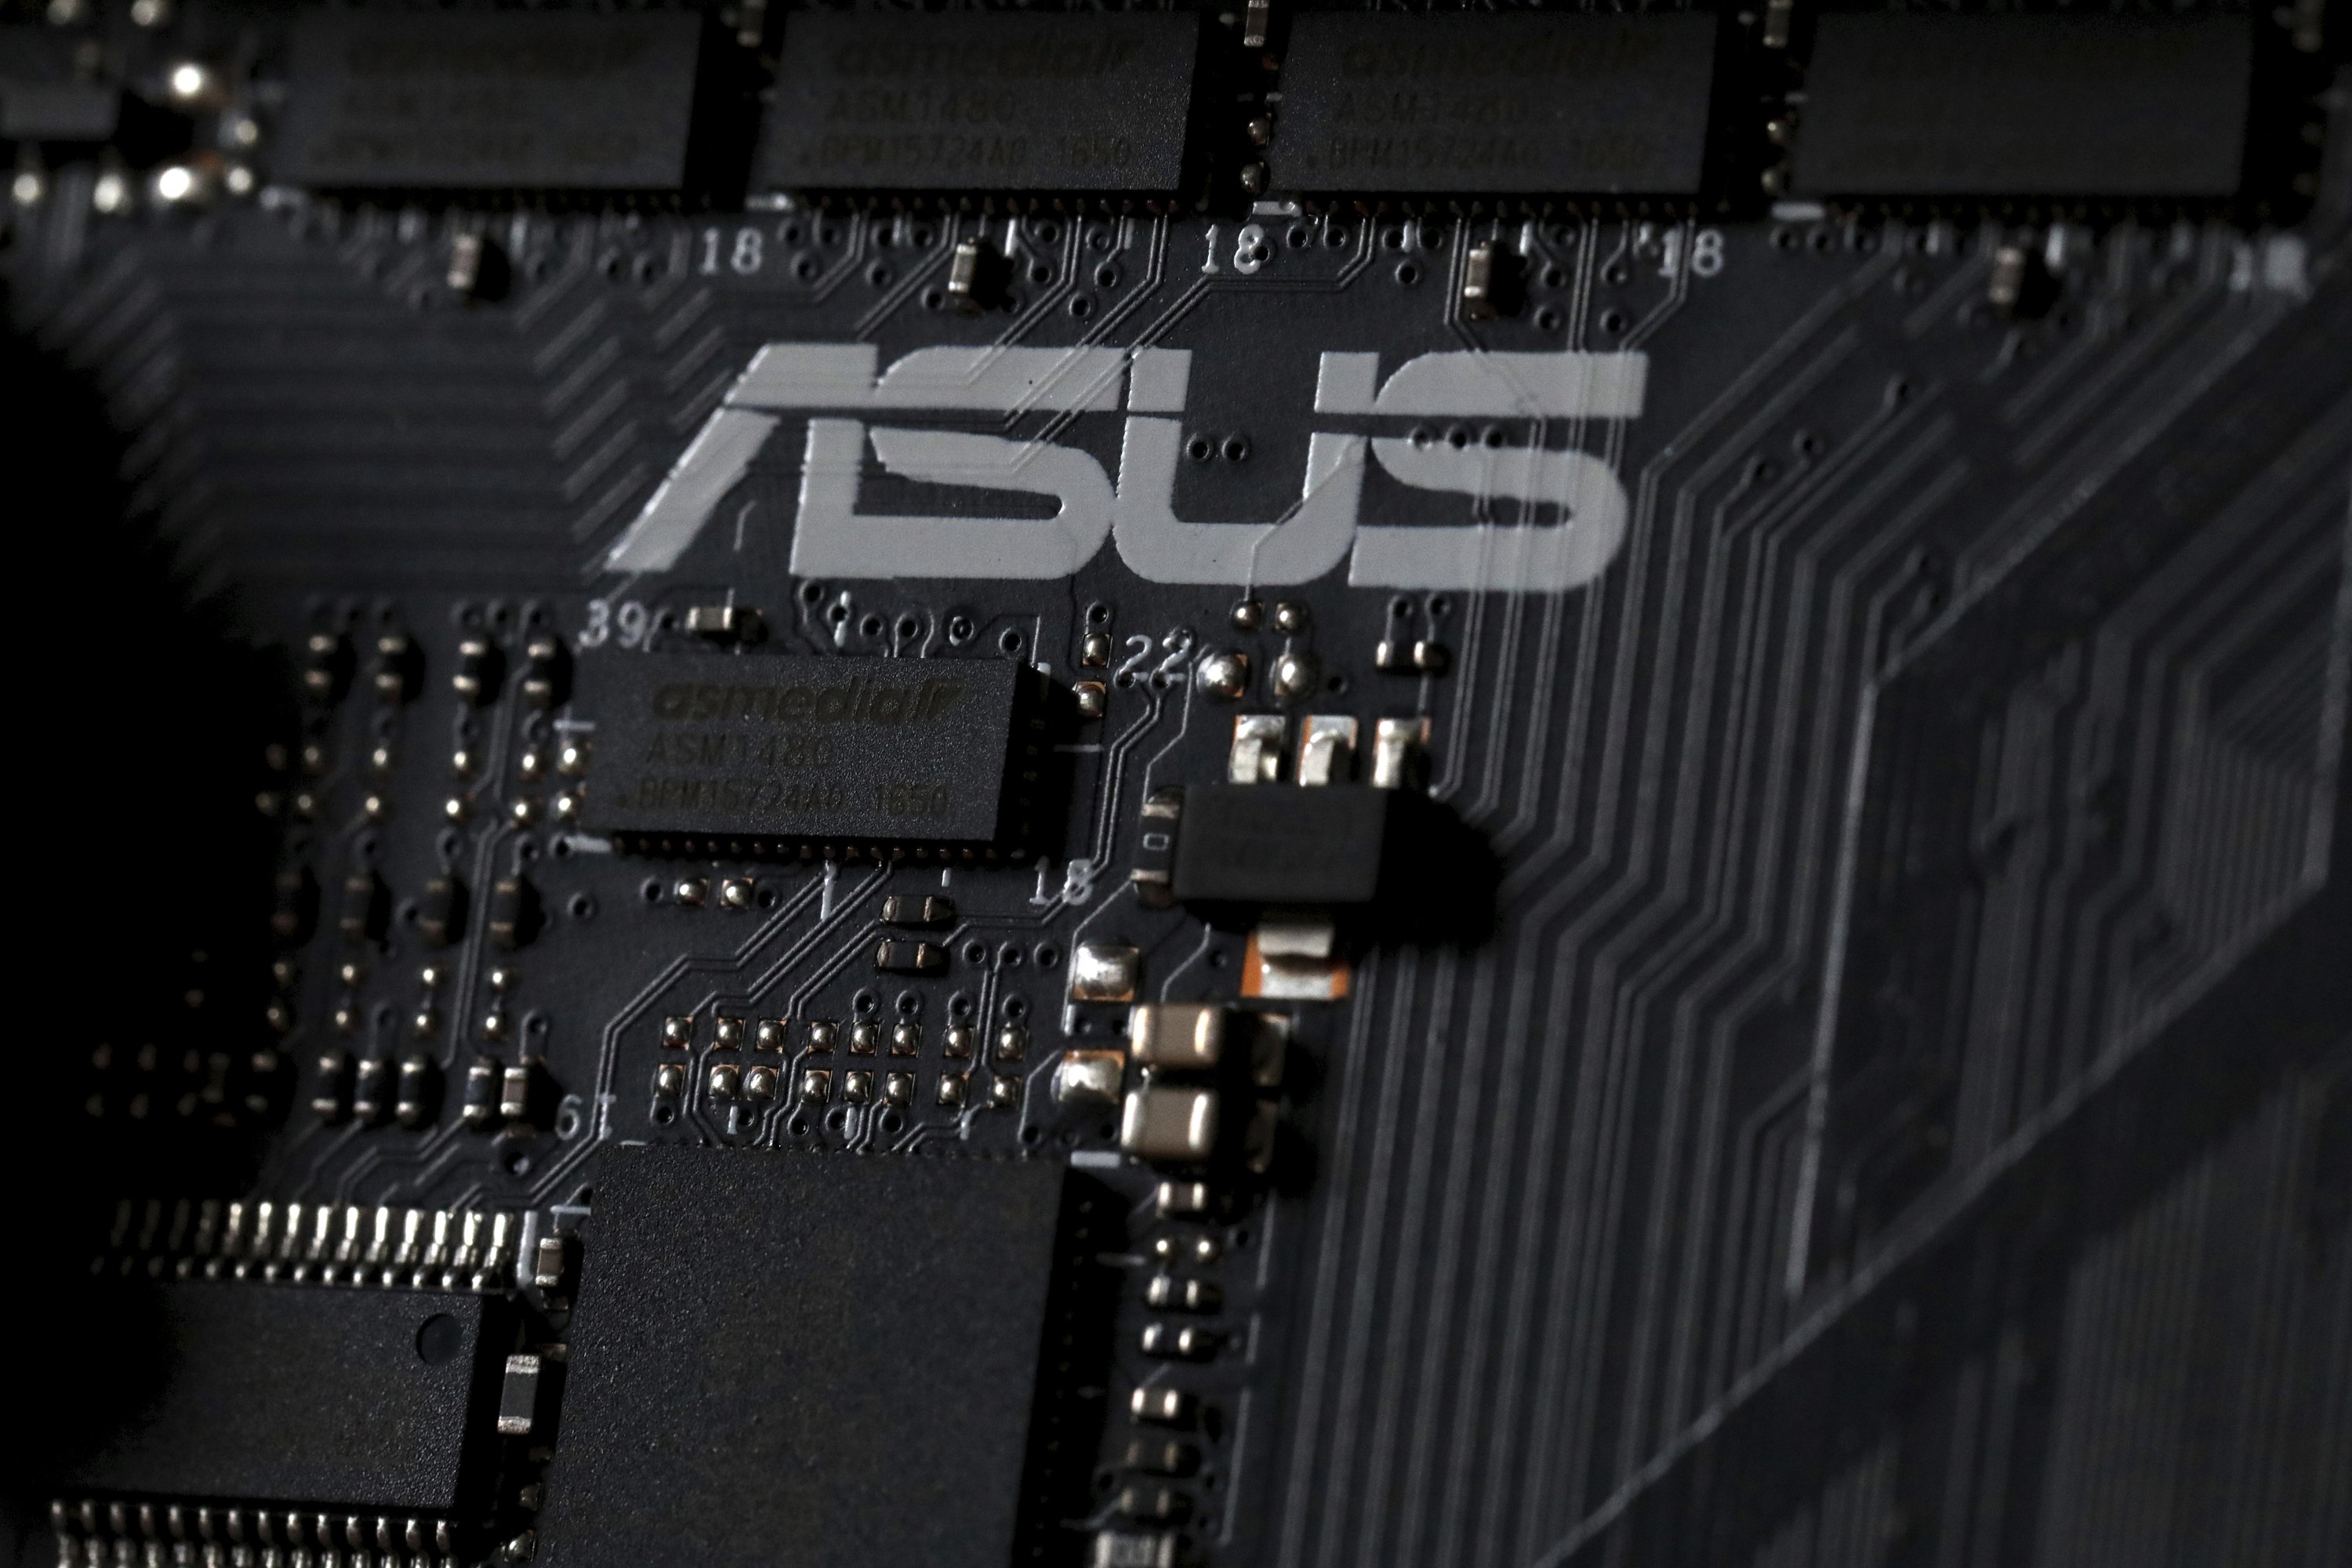 asus live update spyware